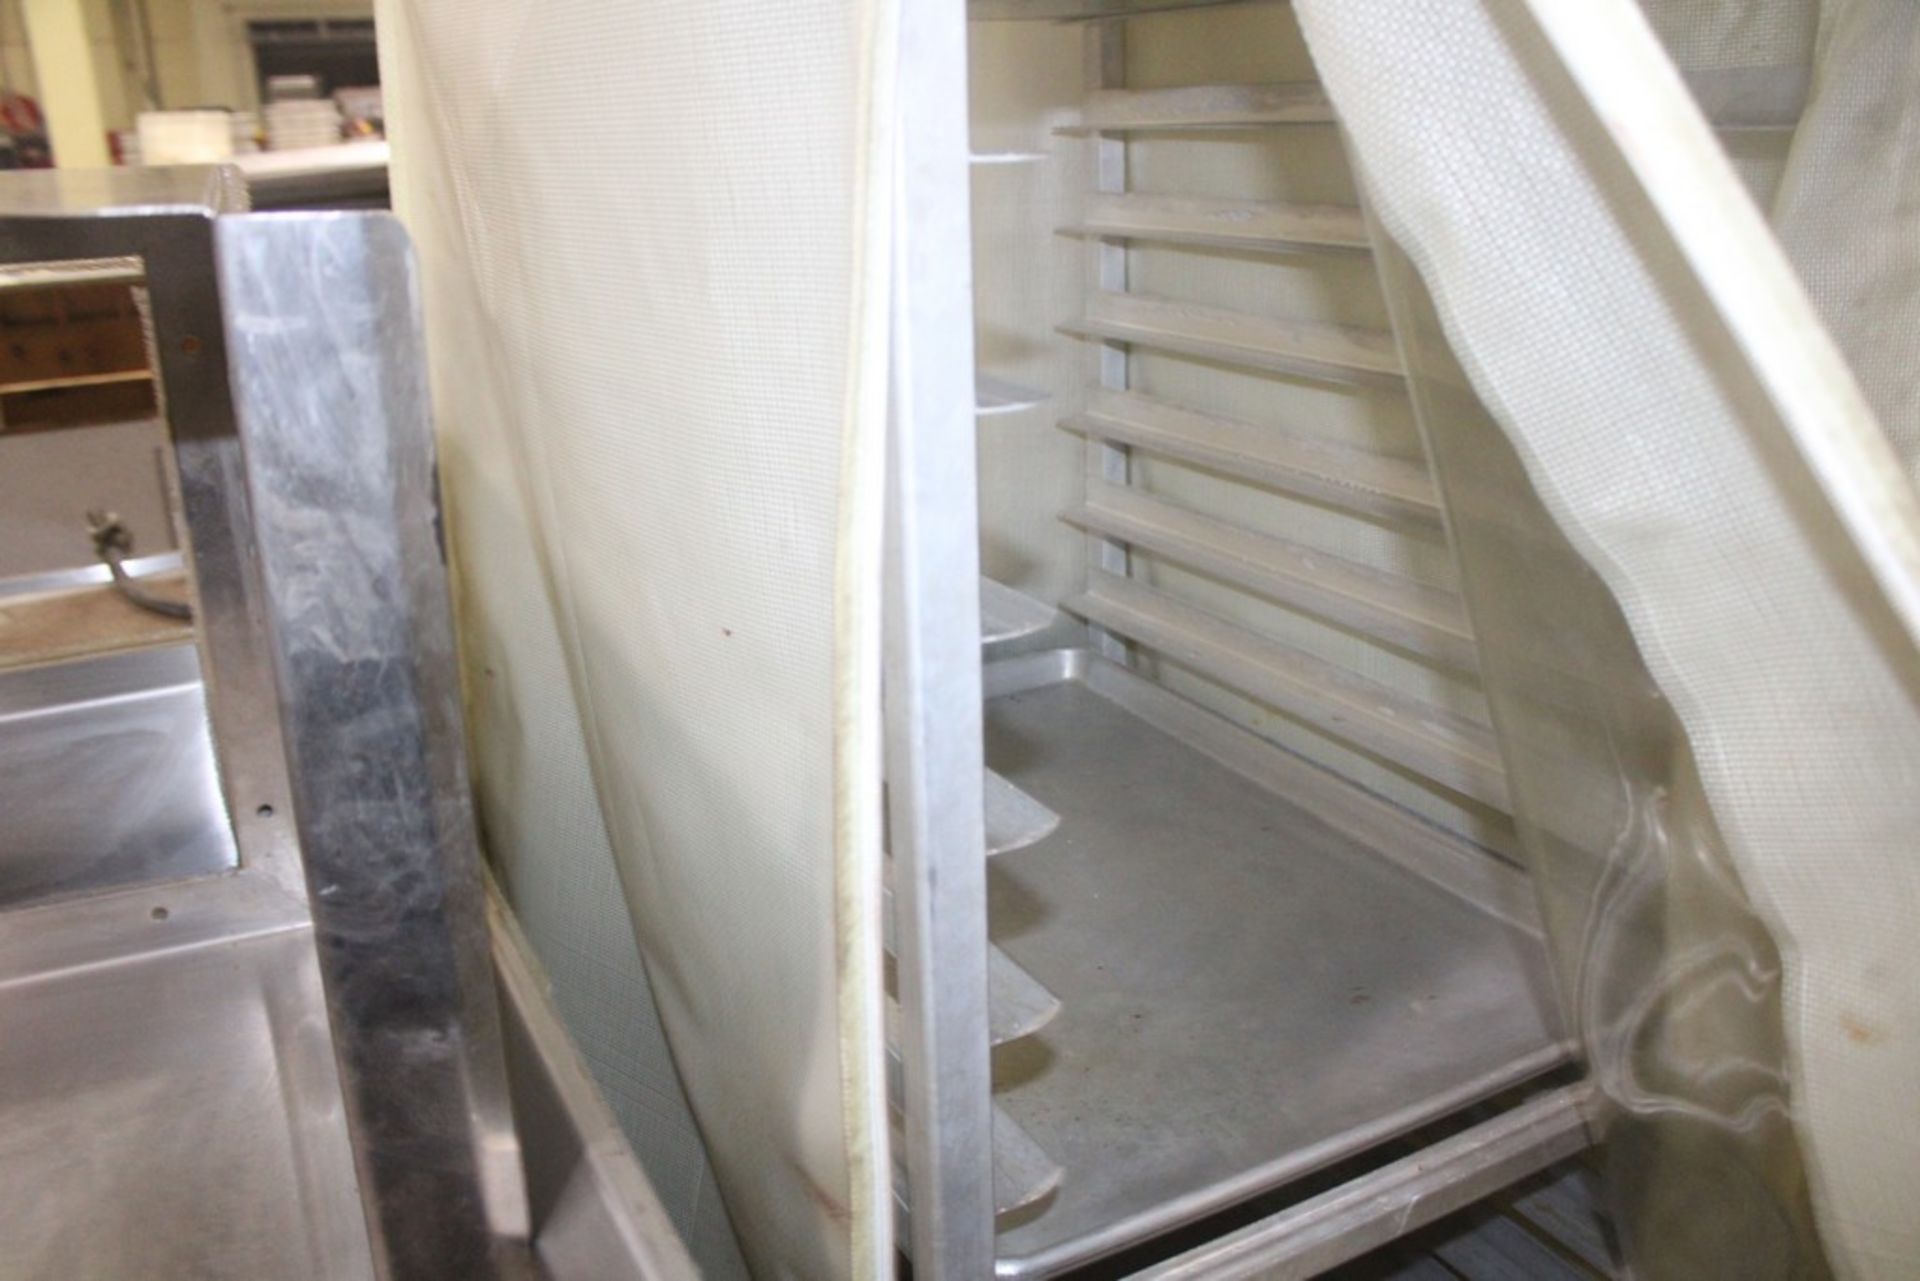 PORTABLE ALUMINUM TRAY STORAGE UNIT WITH COVER - Image 2 of 2